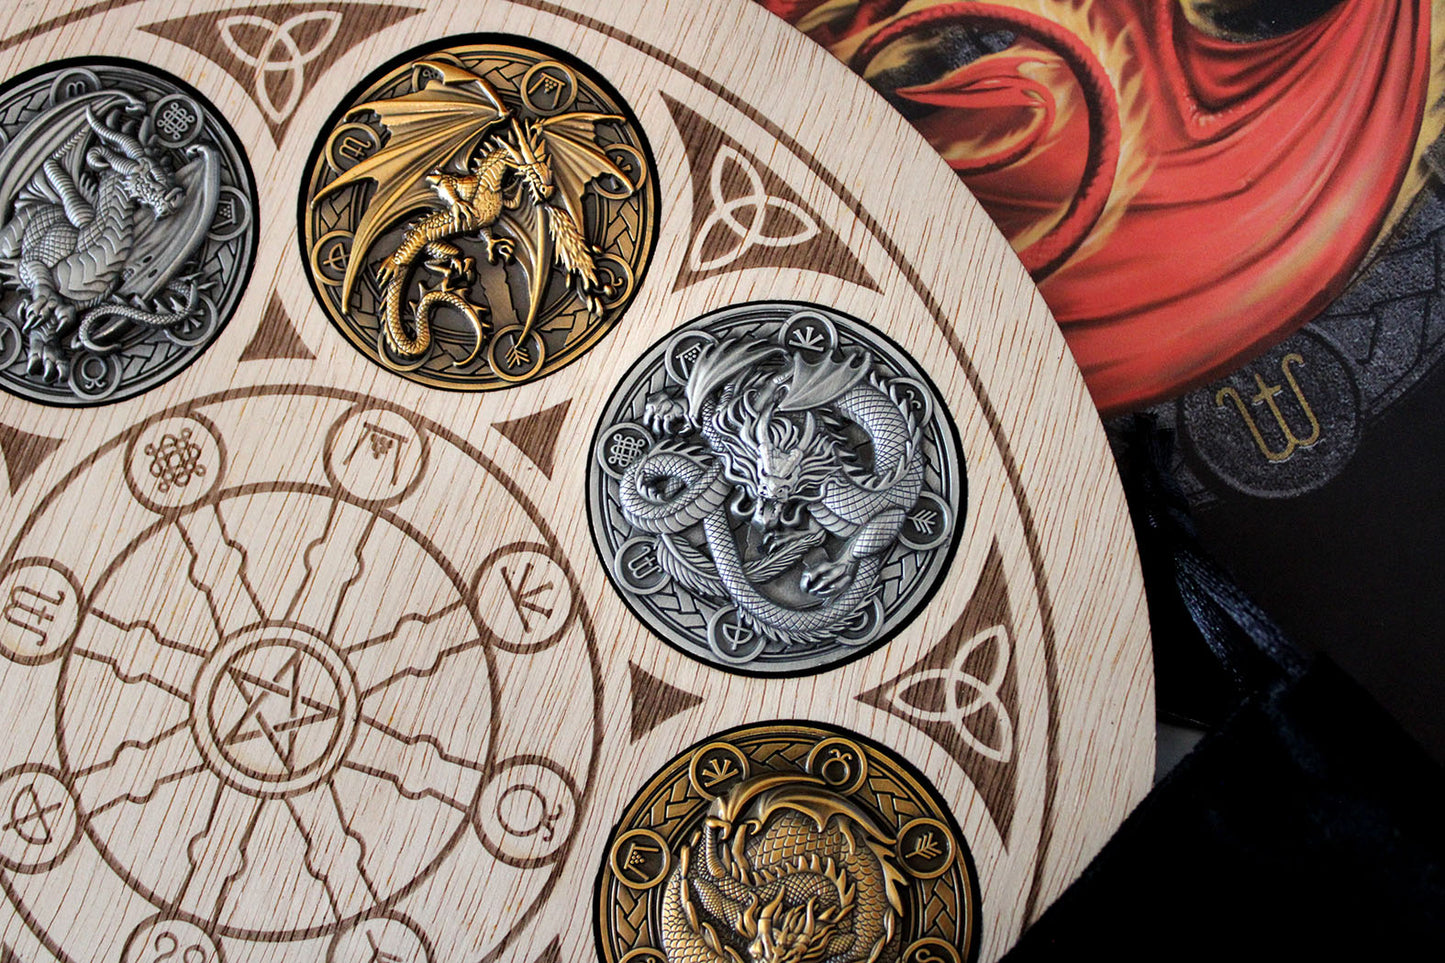 Dragons of the Sabbats coin sets by Anne Stokes